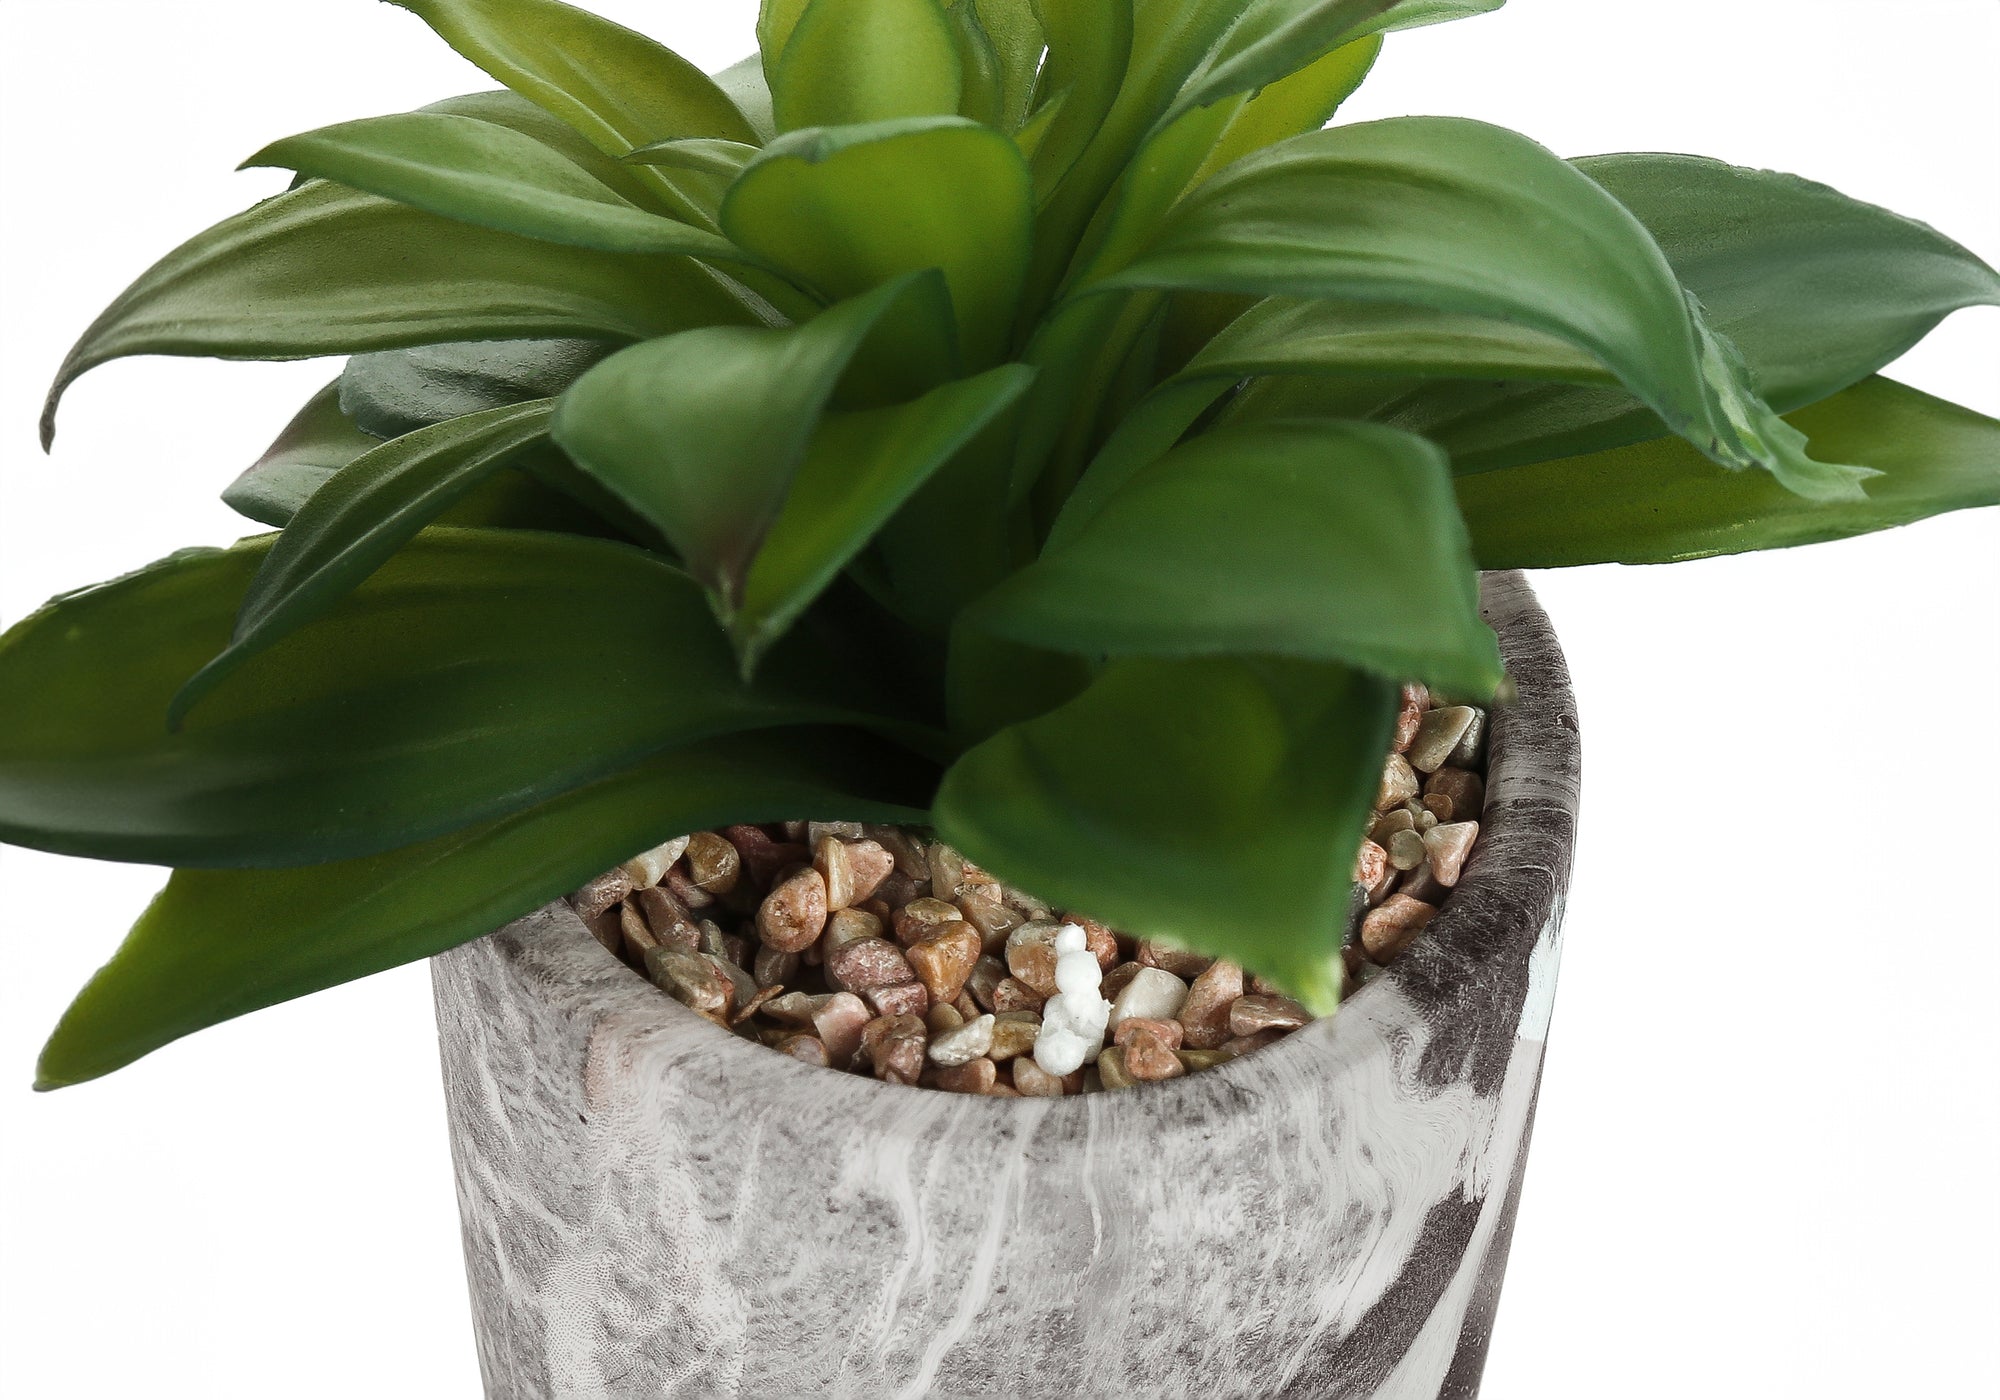 MN-769586    Artificial Plant, 6" Tall, Succulent, Indoor, Faux, Fake, Table, Greenery, Potted, Set Of 2, Decorative, Green Leaves, Grey Cement Pots